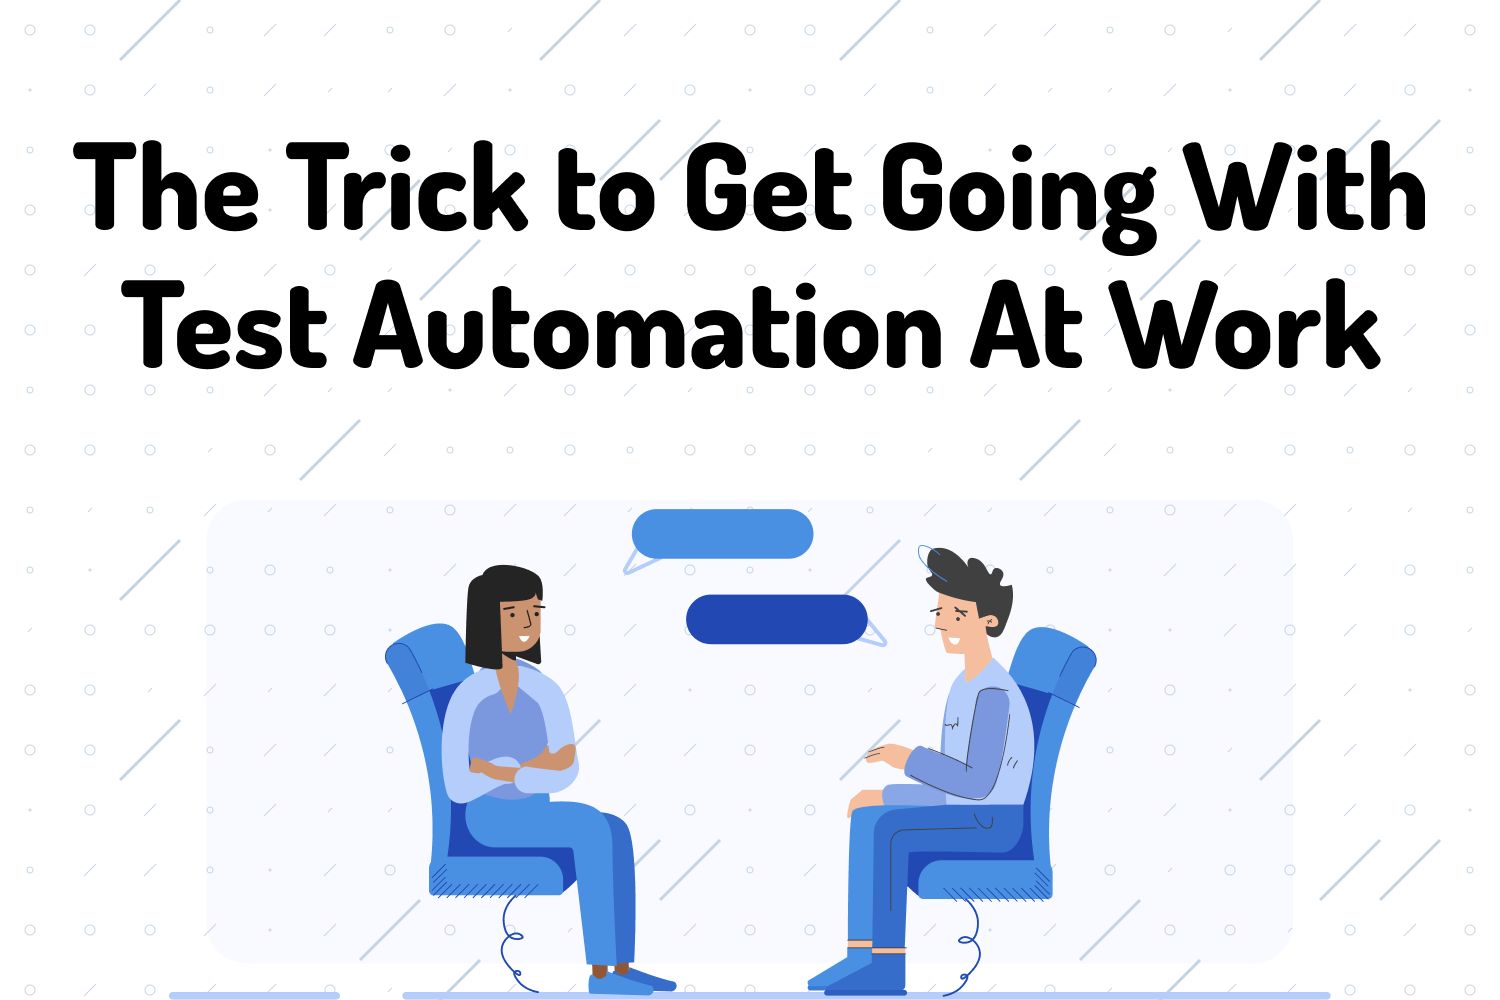 The Trick to Get Going With Test Automation At Work